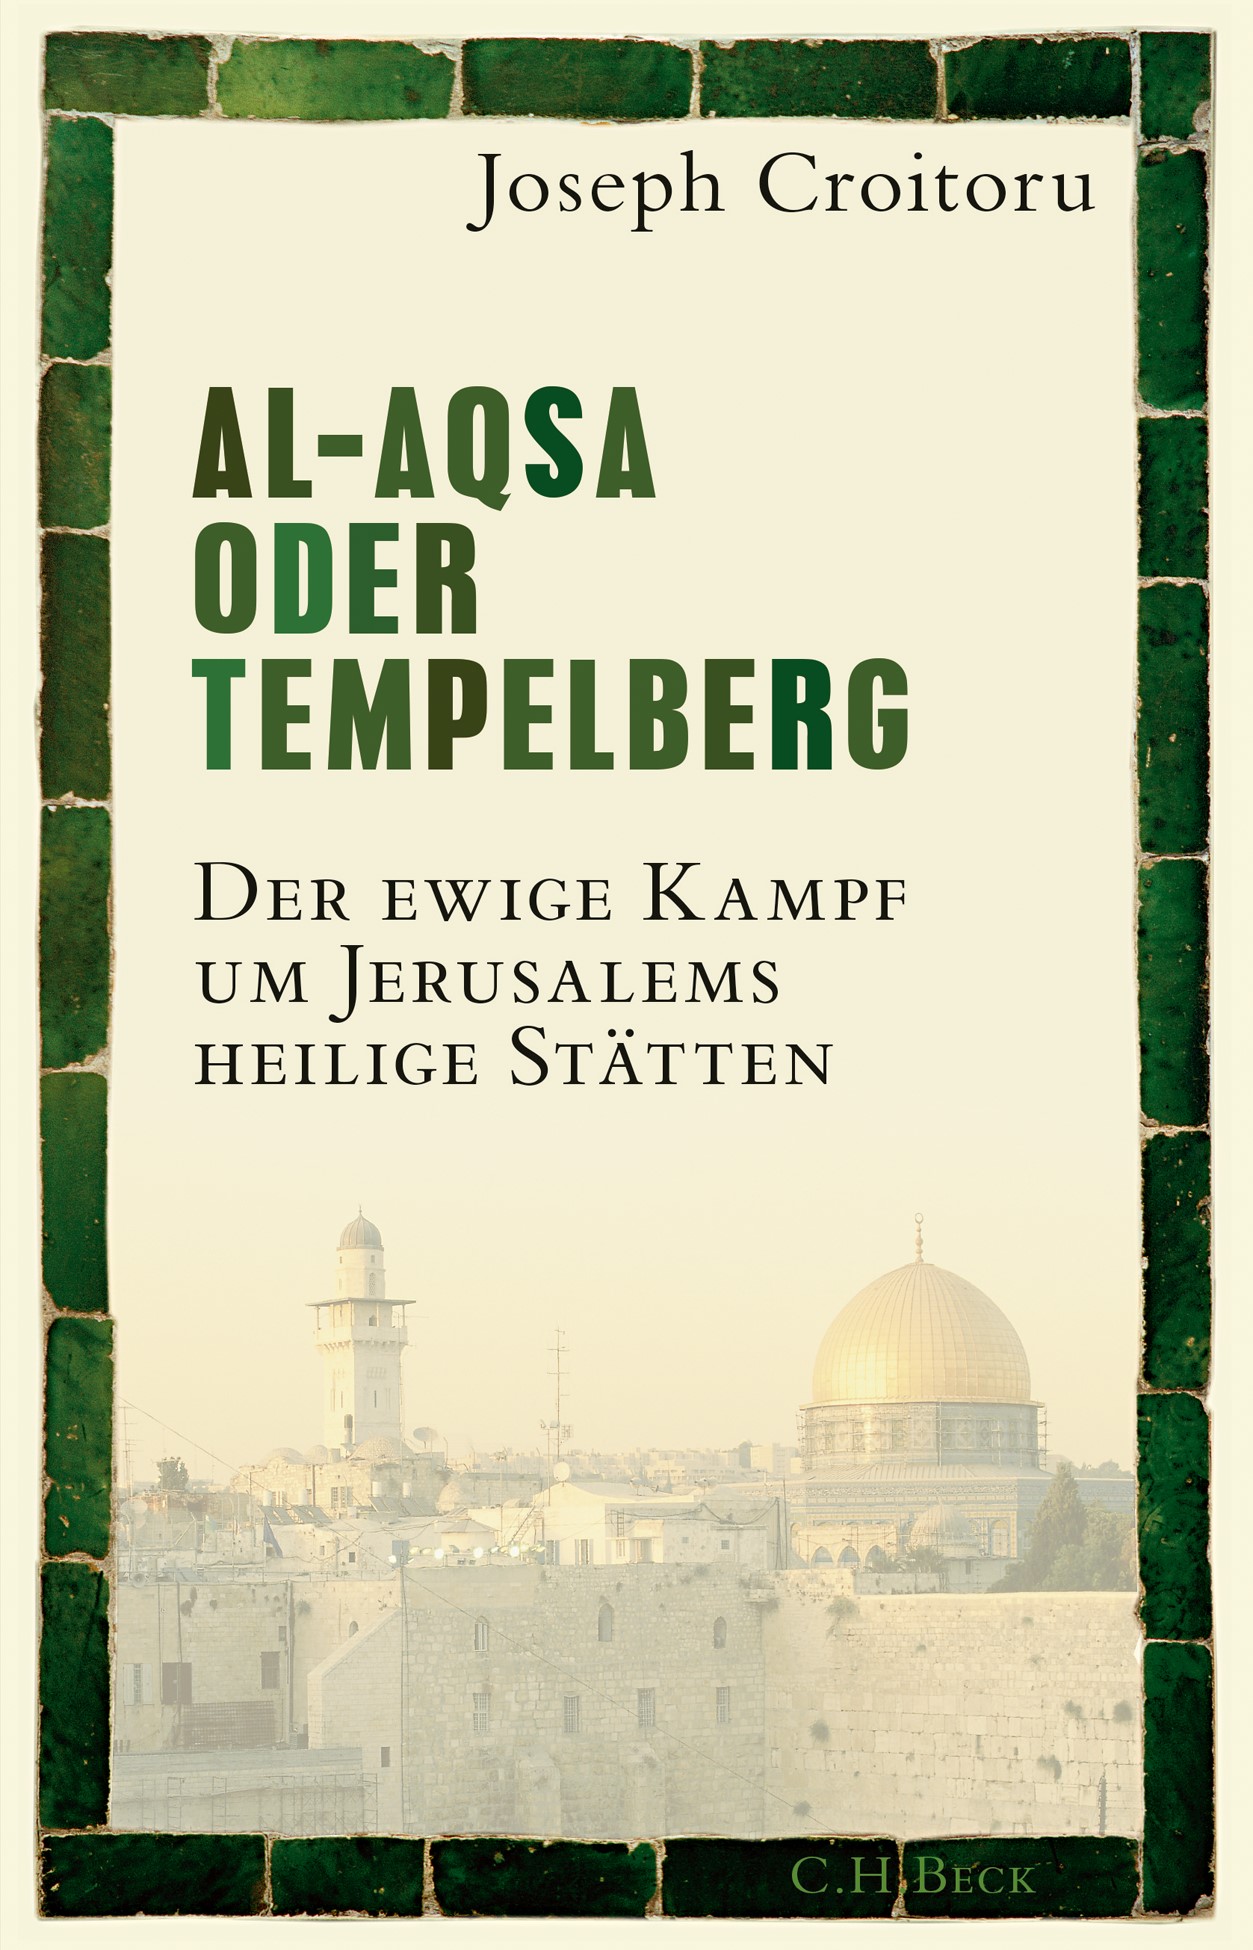 Cover of Joseph Croitoru's "Al-Aqsa oder Tempelberg" (published in German by C. H. Beck)